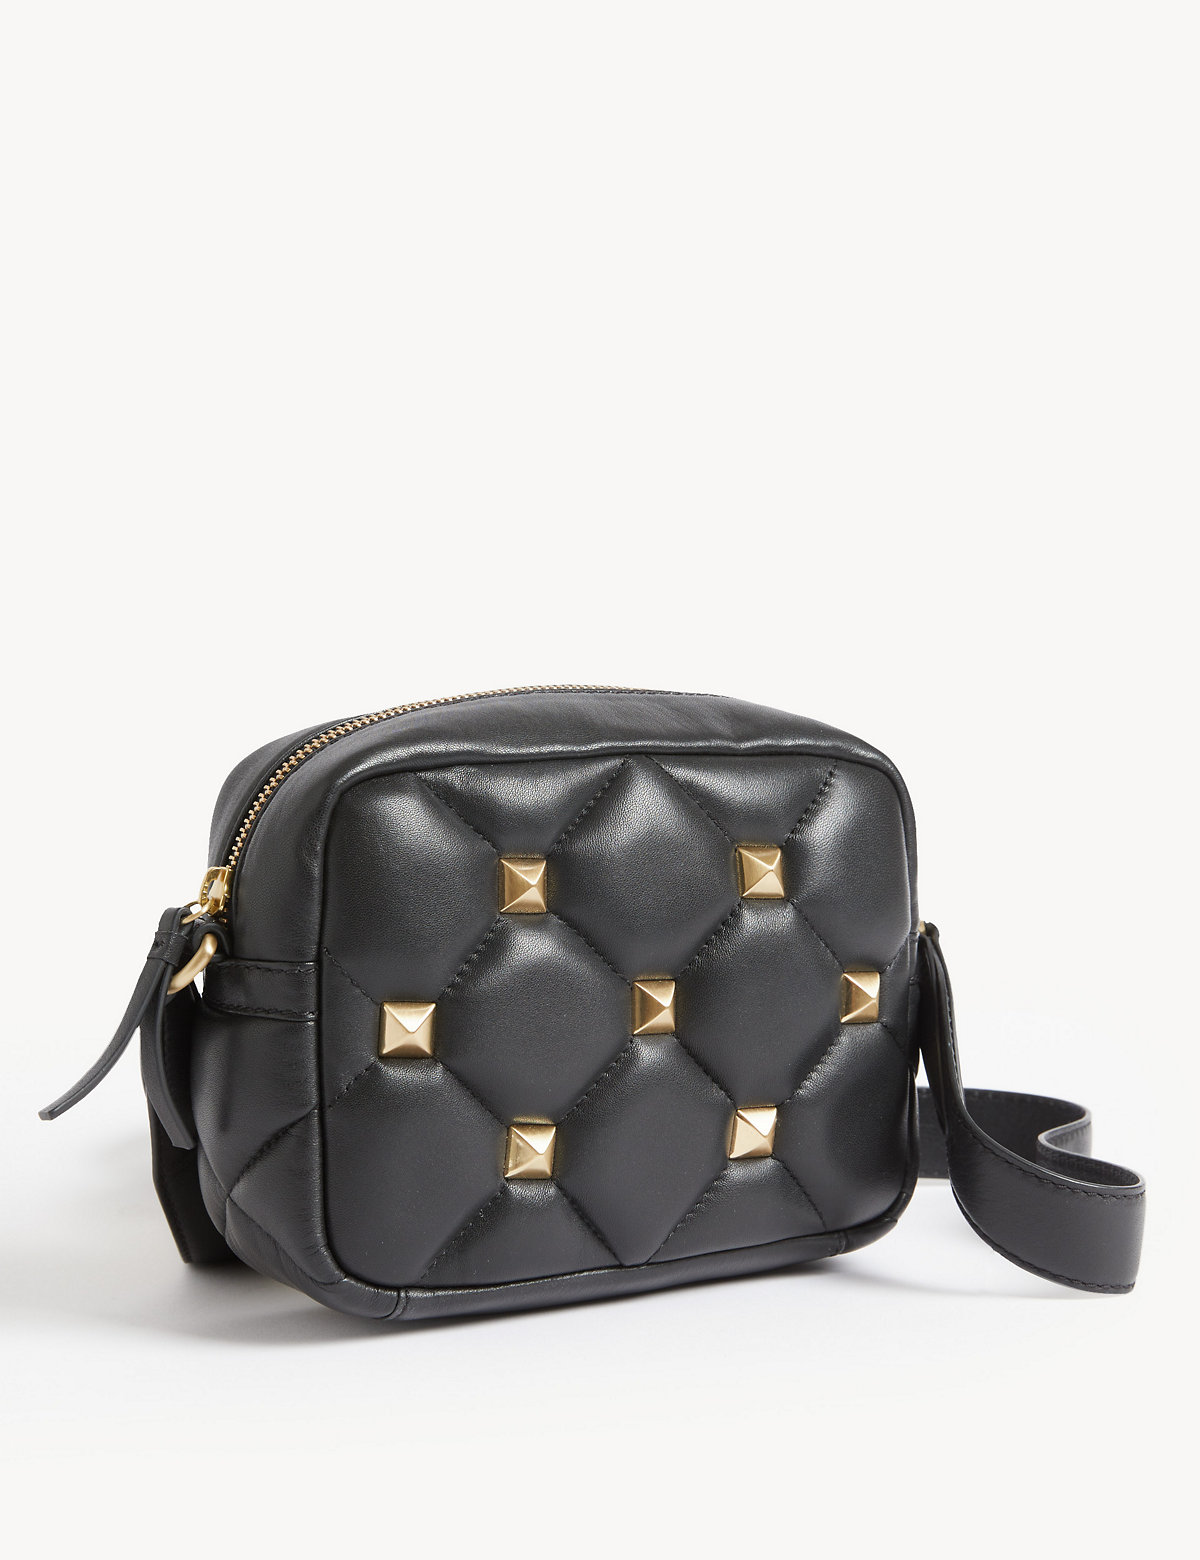 Leather Quilted Cross Body Camera Bag